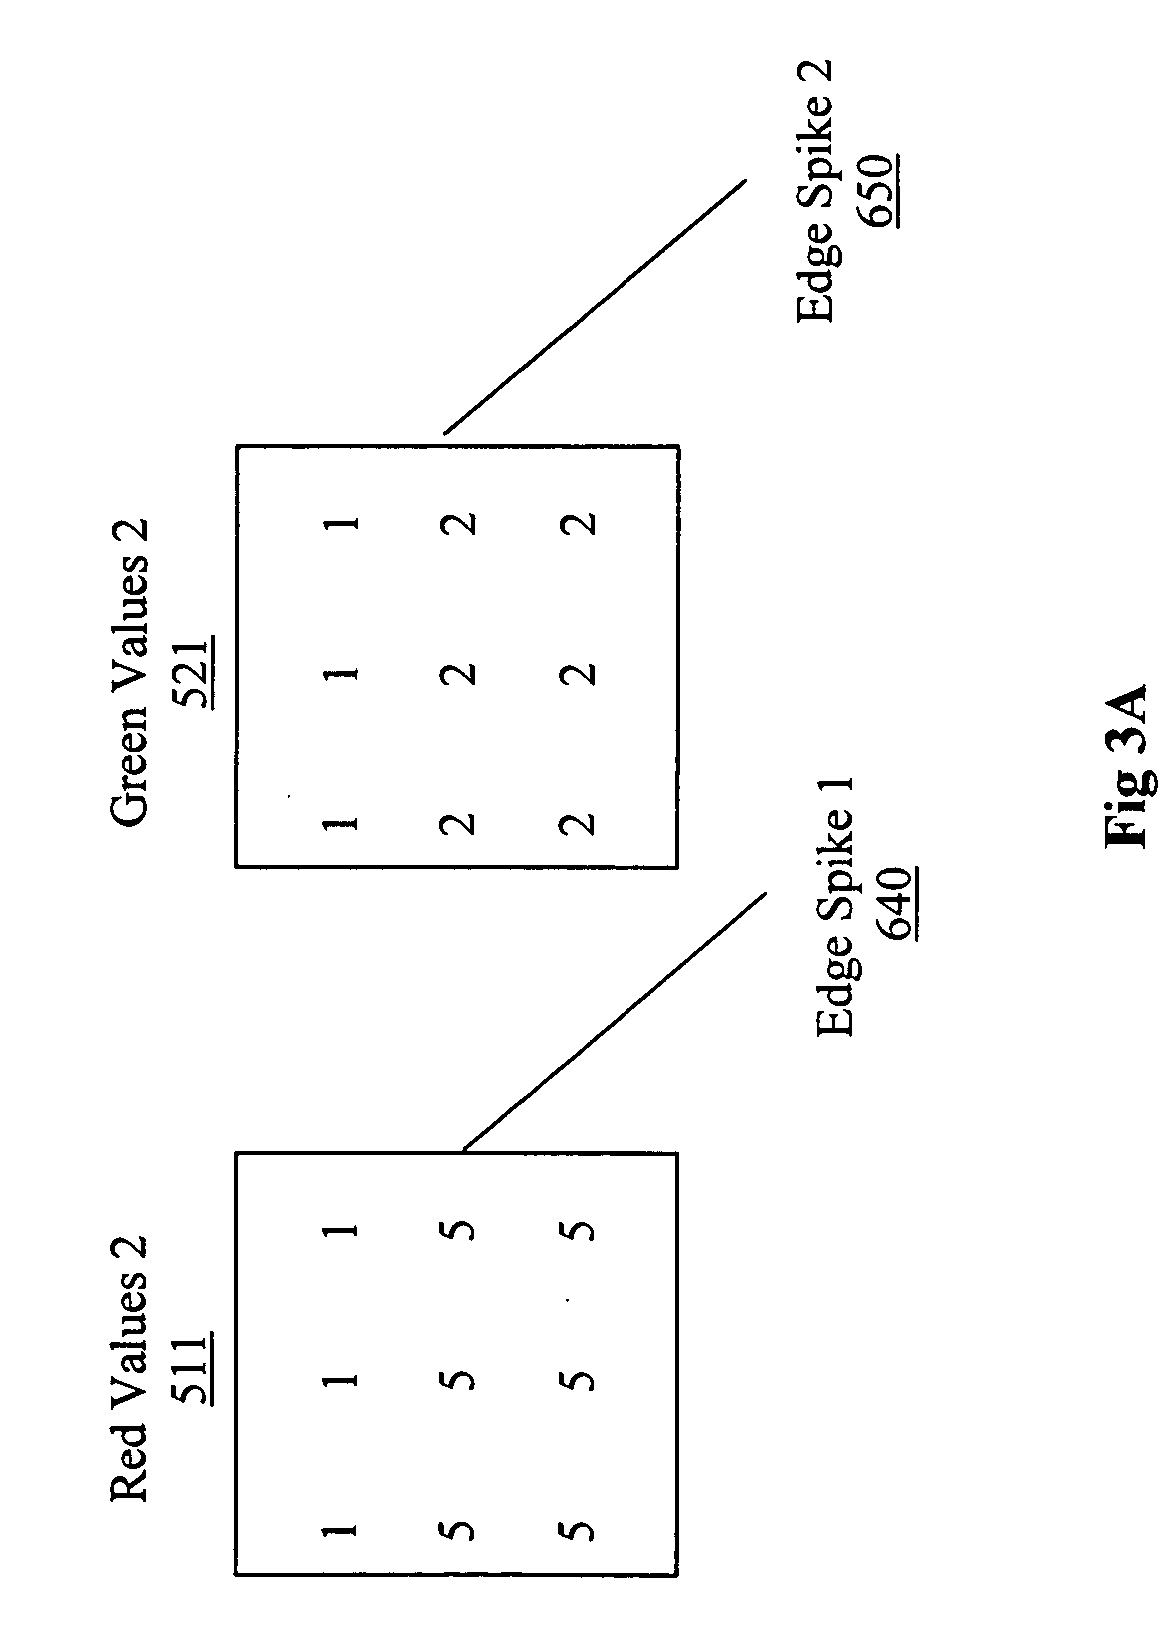 System and method for a vector difference mean filter for noise suppression